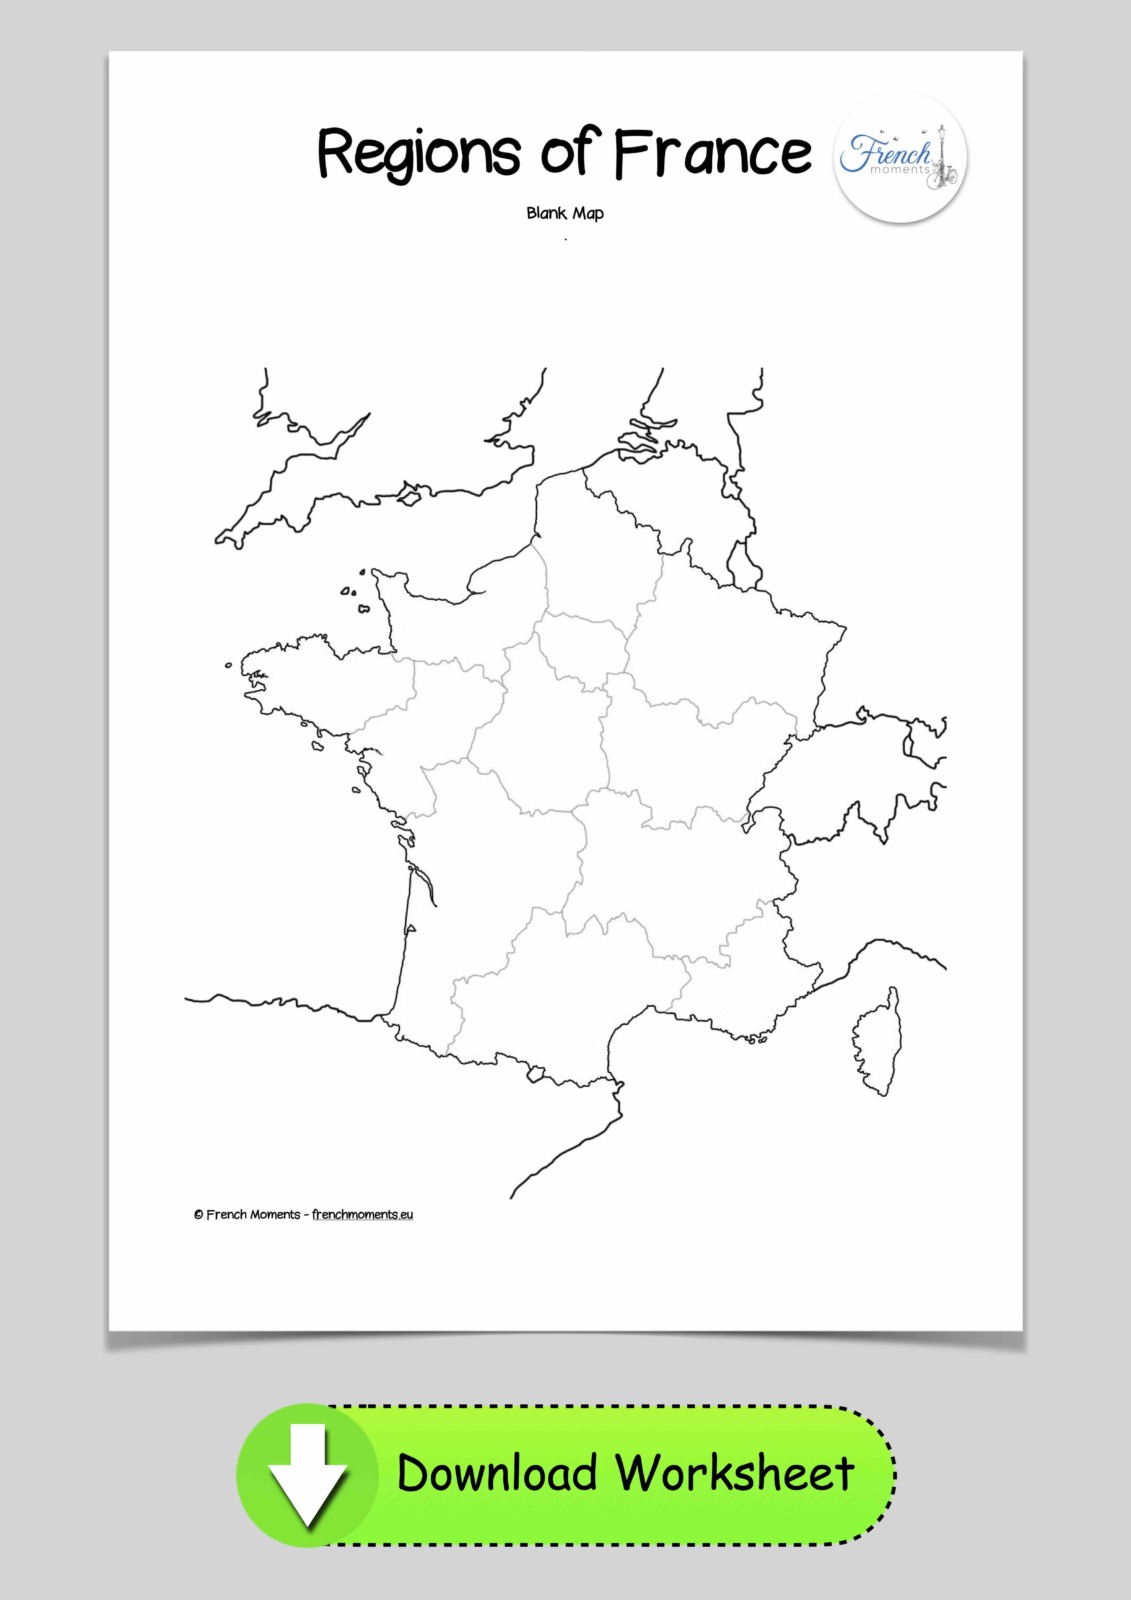 Blank Map of the regions of France © French Moments